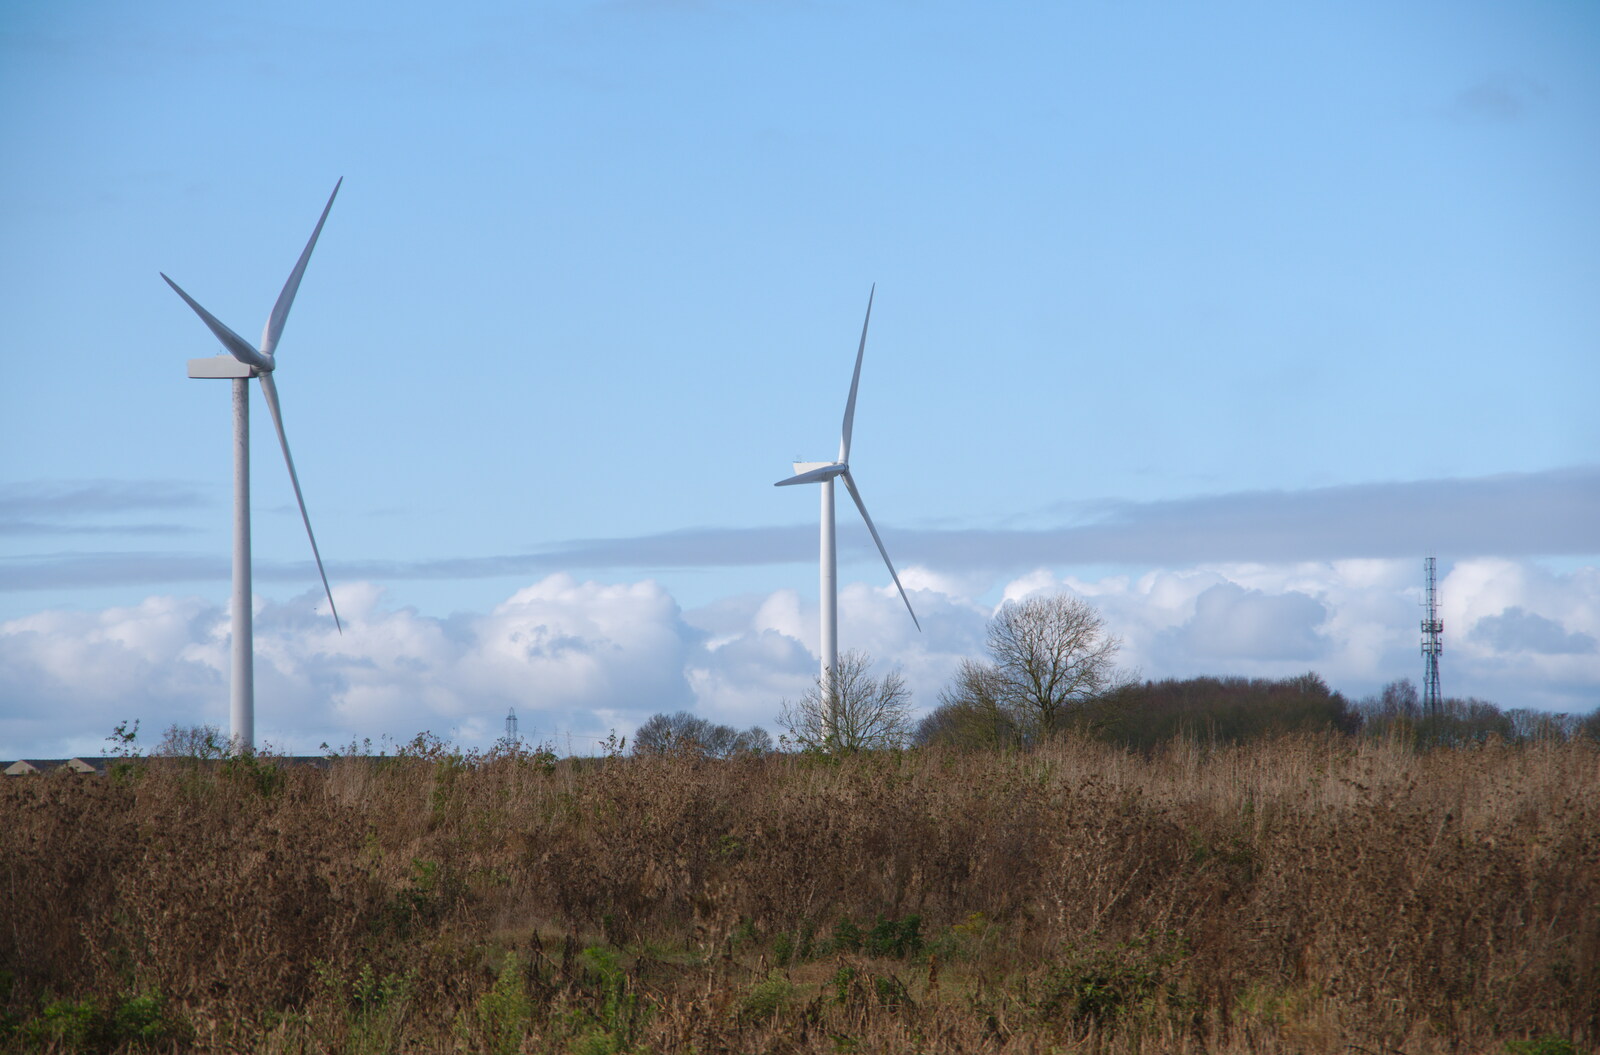 Two of the Eye airfield wind turbines from Pizza Express and a School Quiz, Bury St. Edmunds and Eye, Suffolk - 30th November 2019